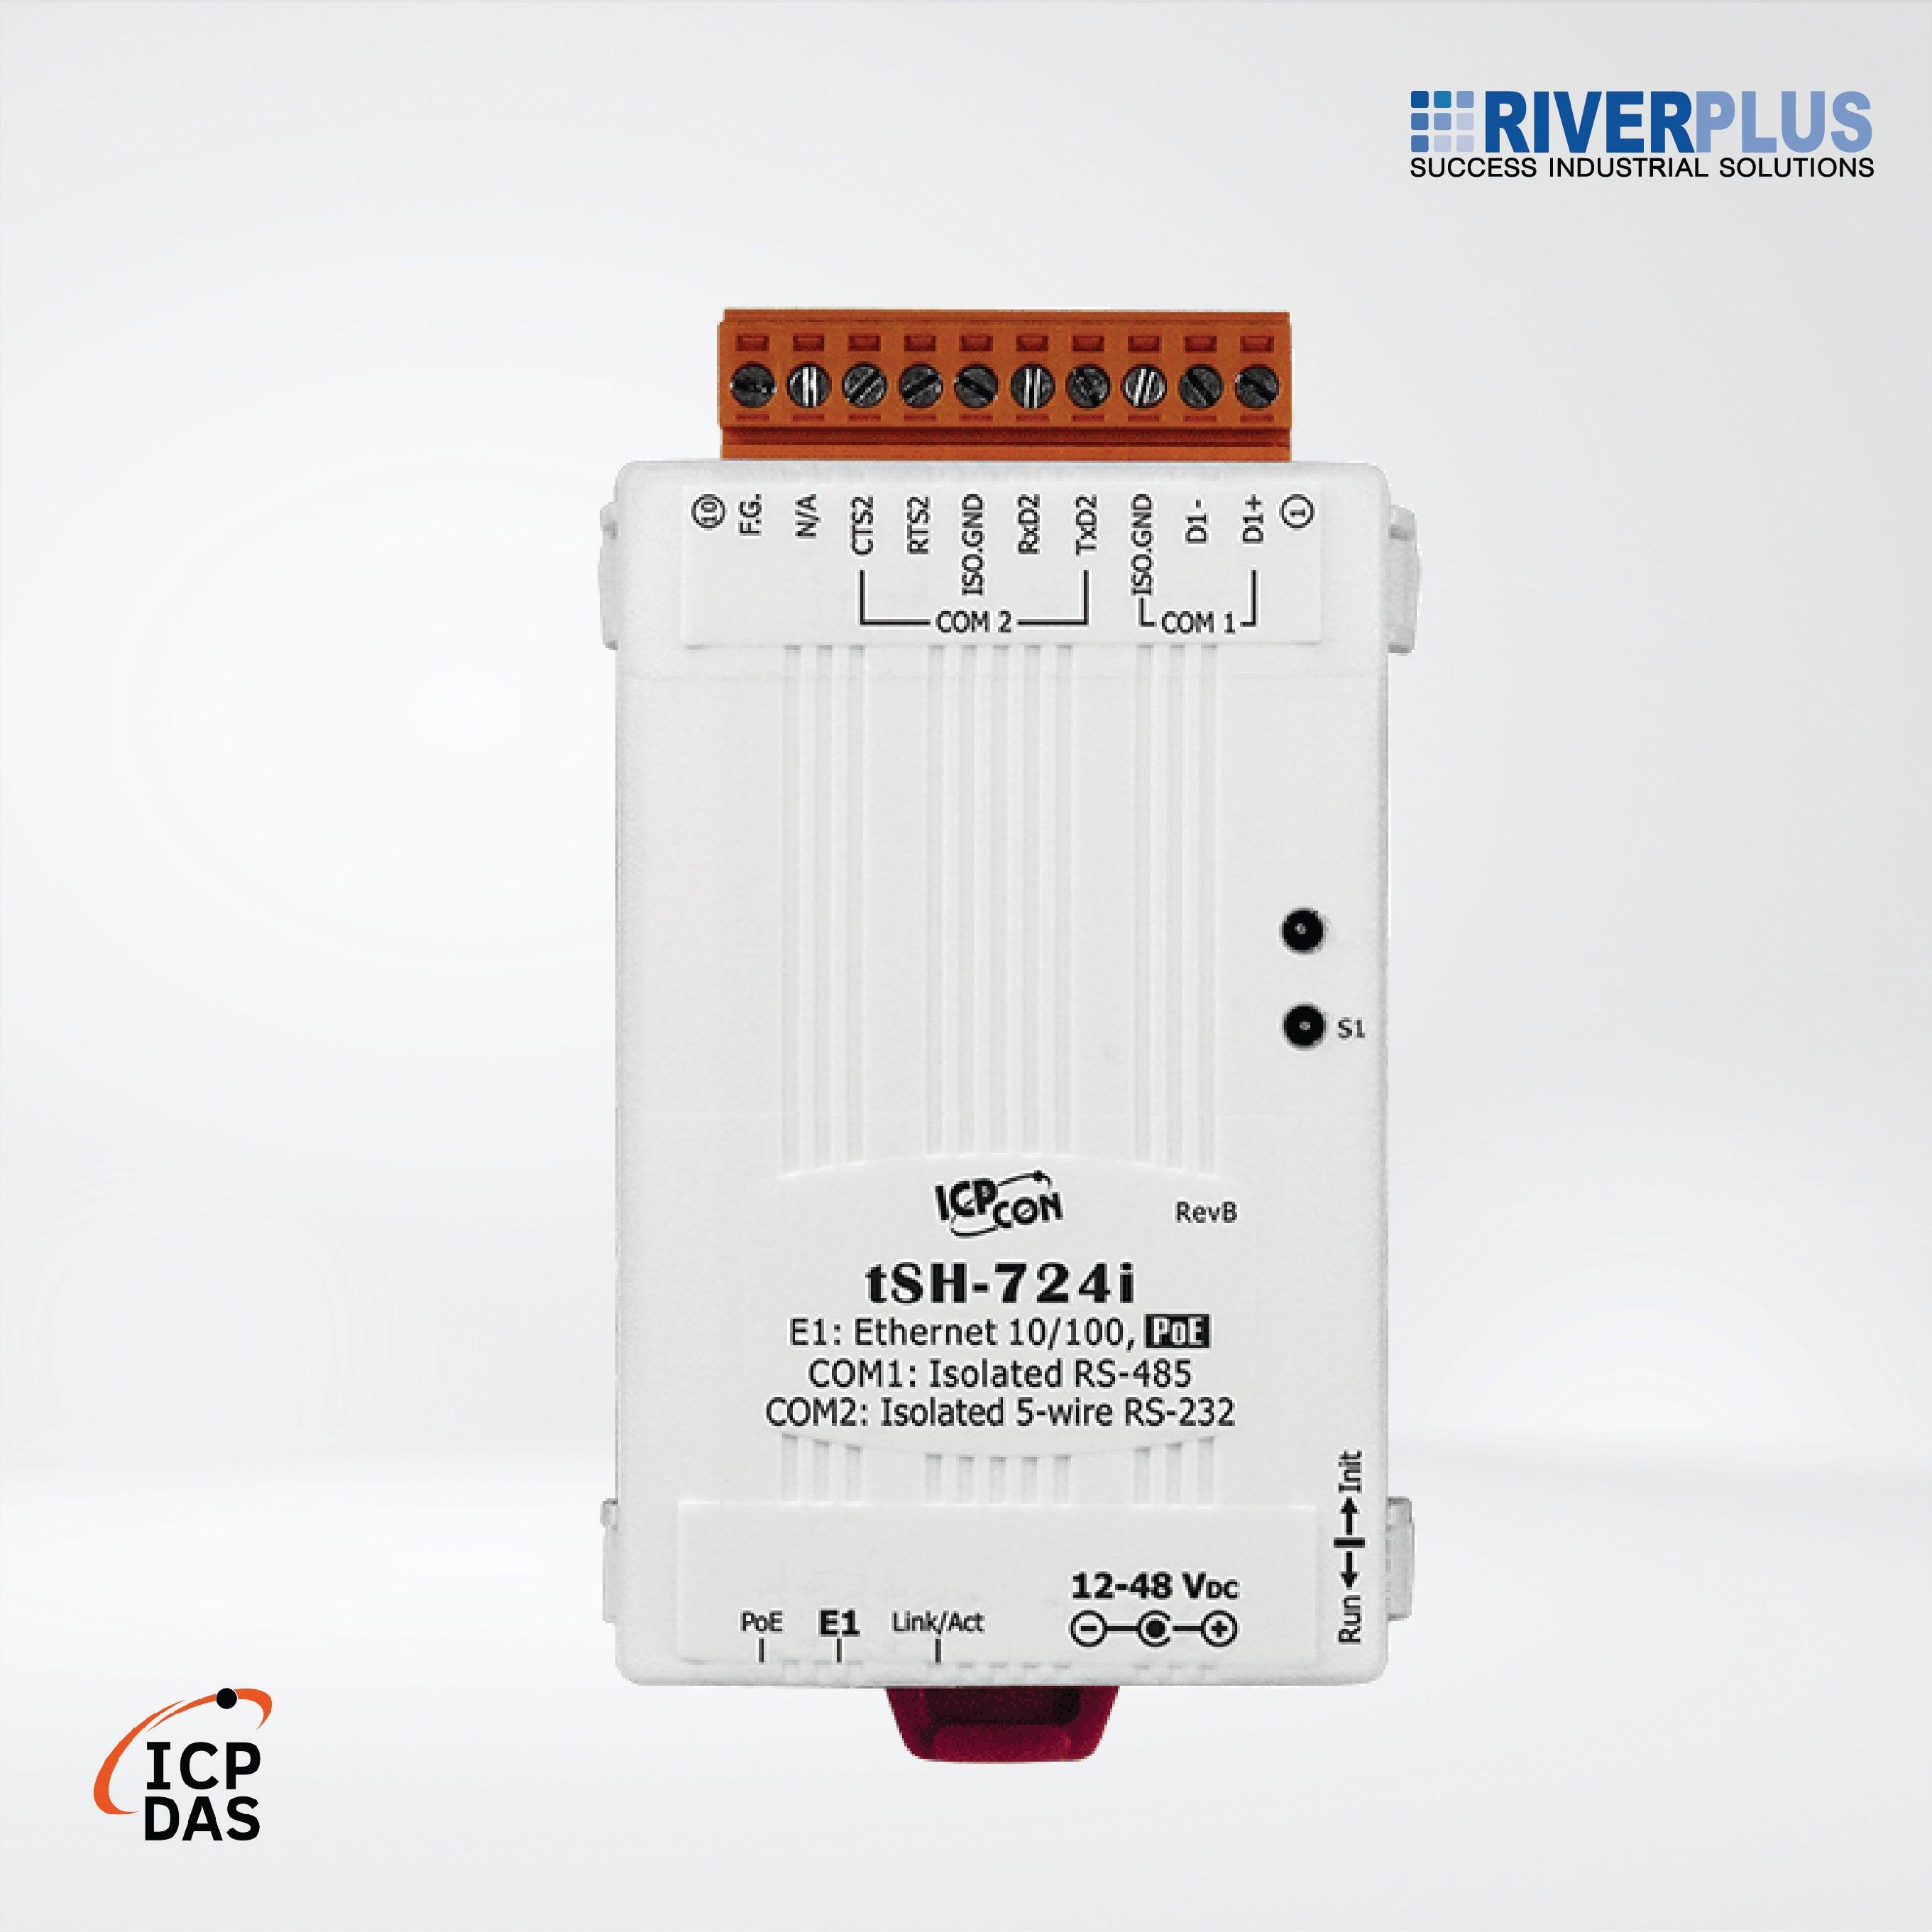 tSH-724i Tiny (1x Isolated RS-232 and 1x Isolated RS-485) Serial Port Converter with PoE - Riverplus